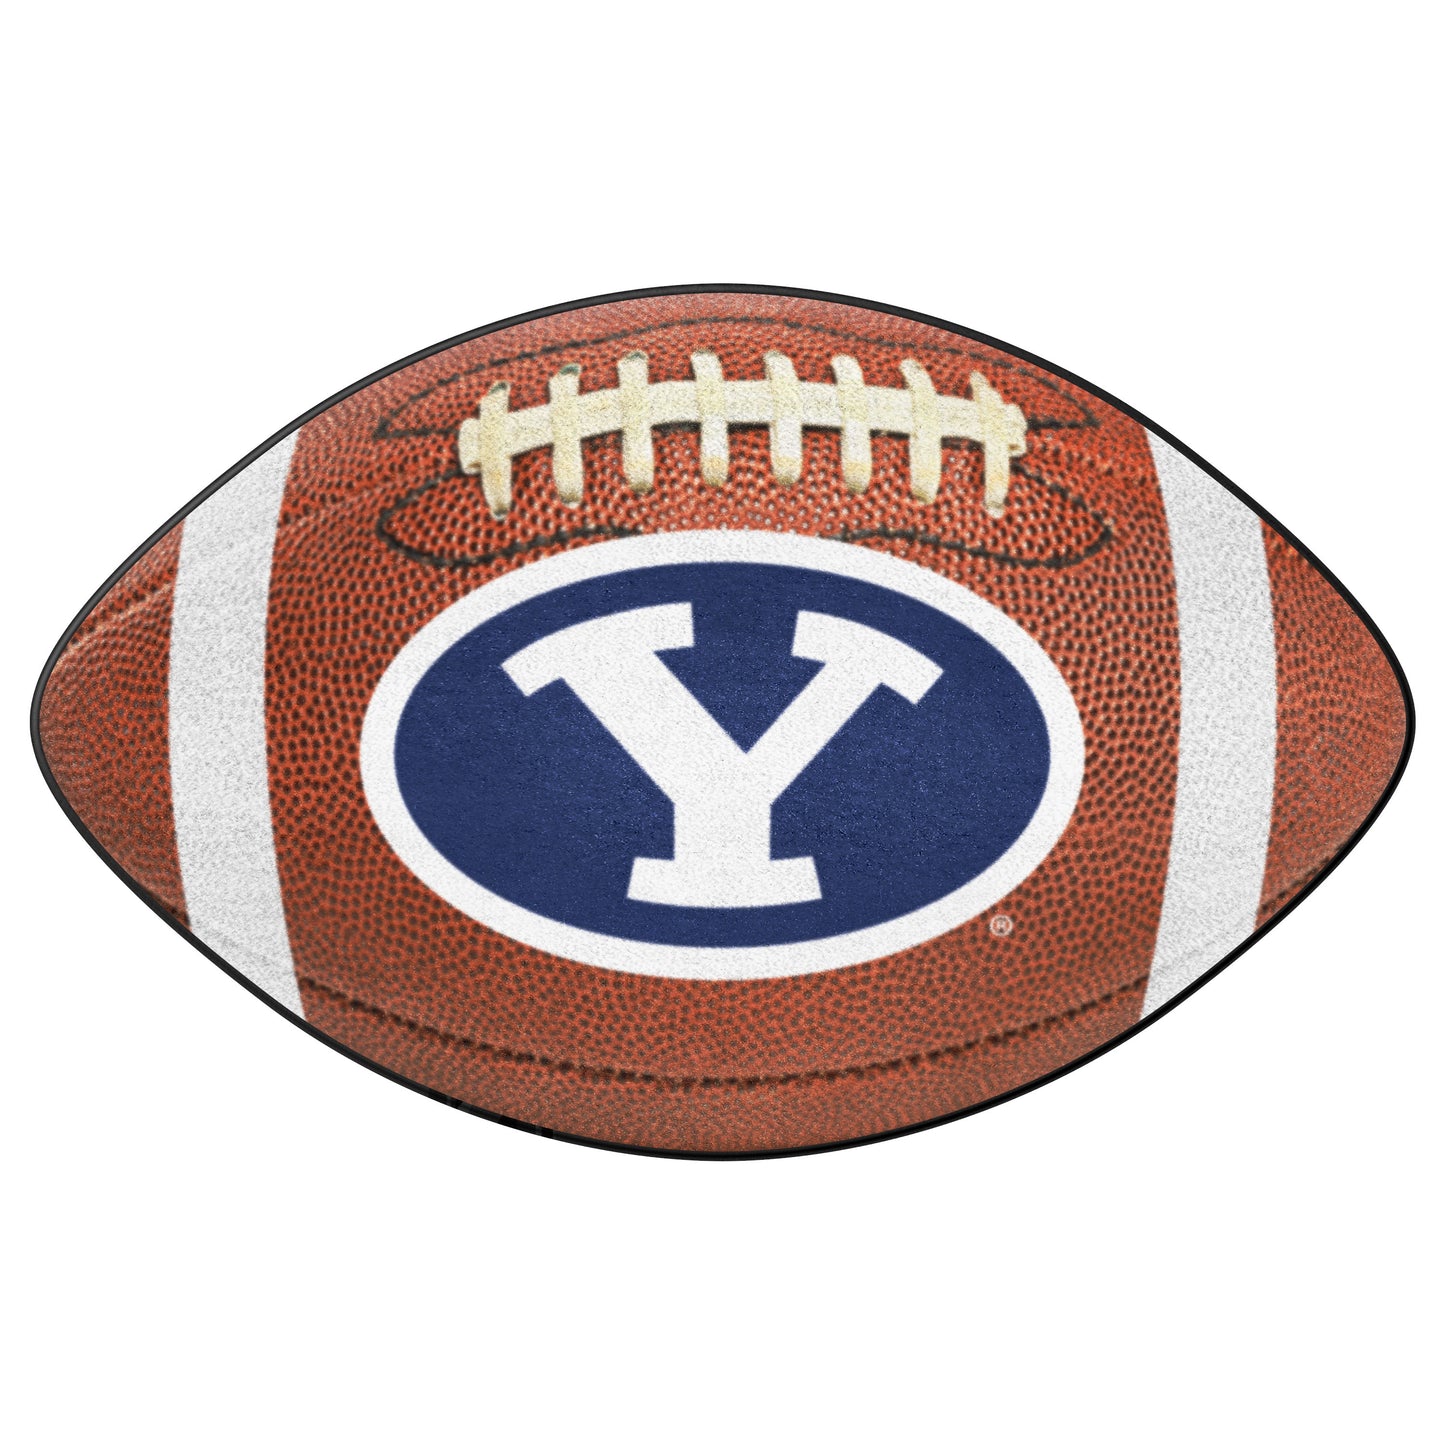 BYU Cougars Football Rug - 20.5in. x 32.5in.